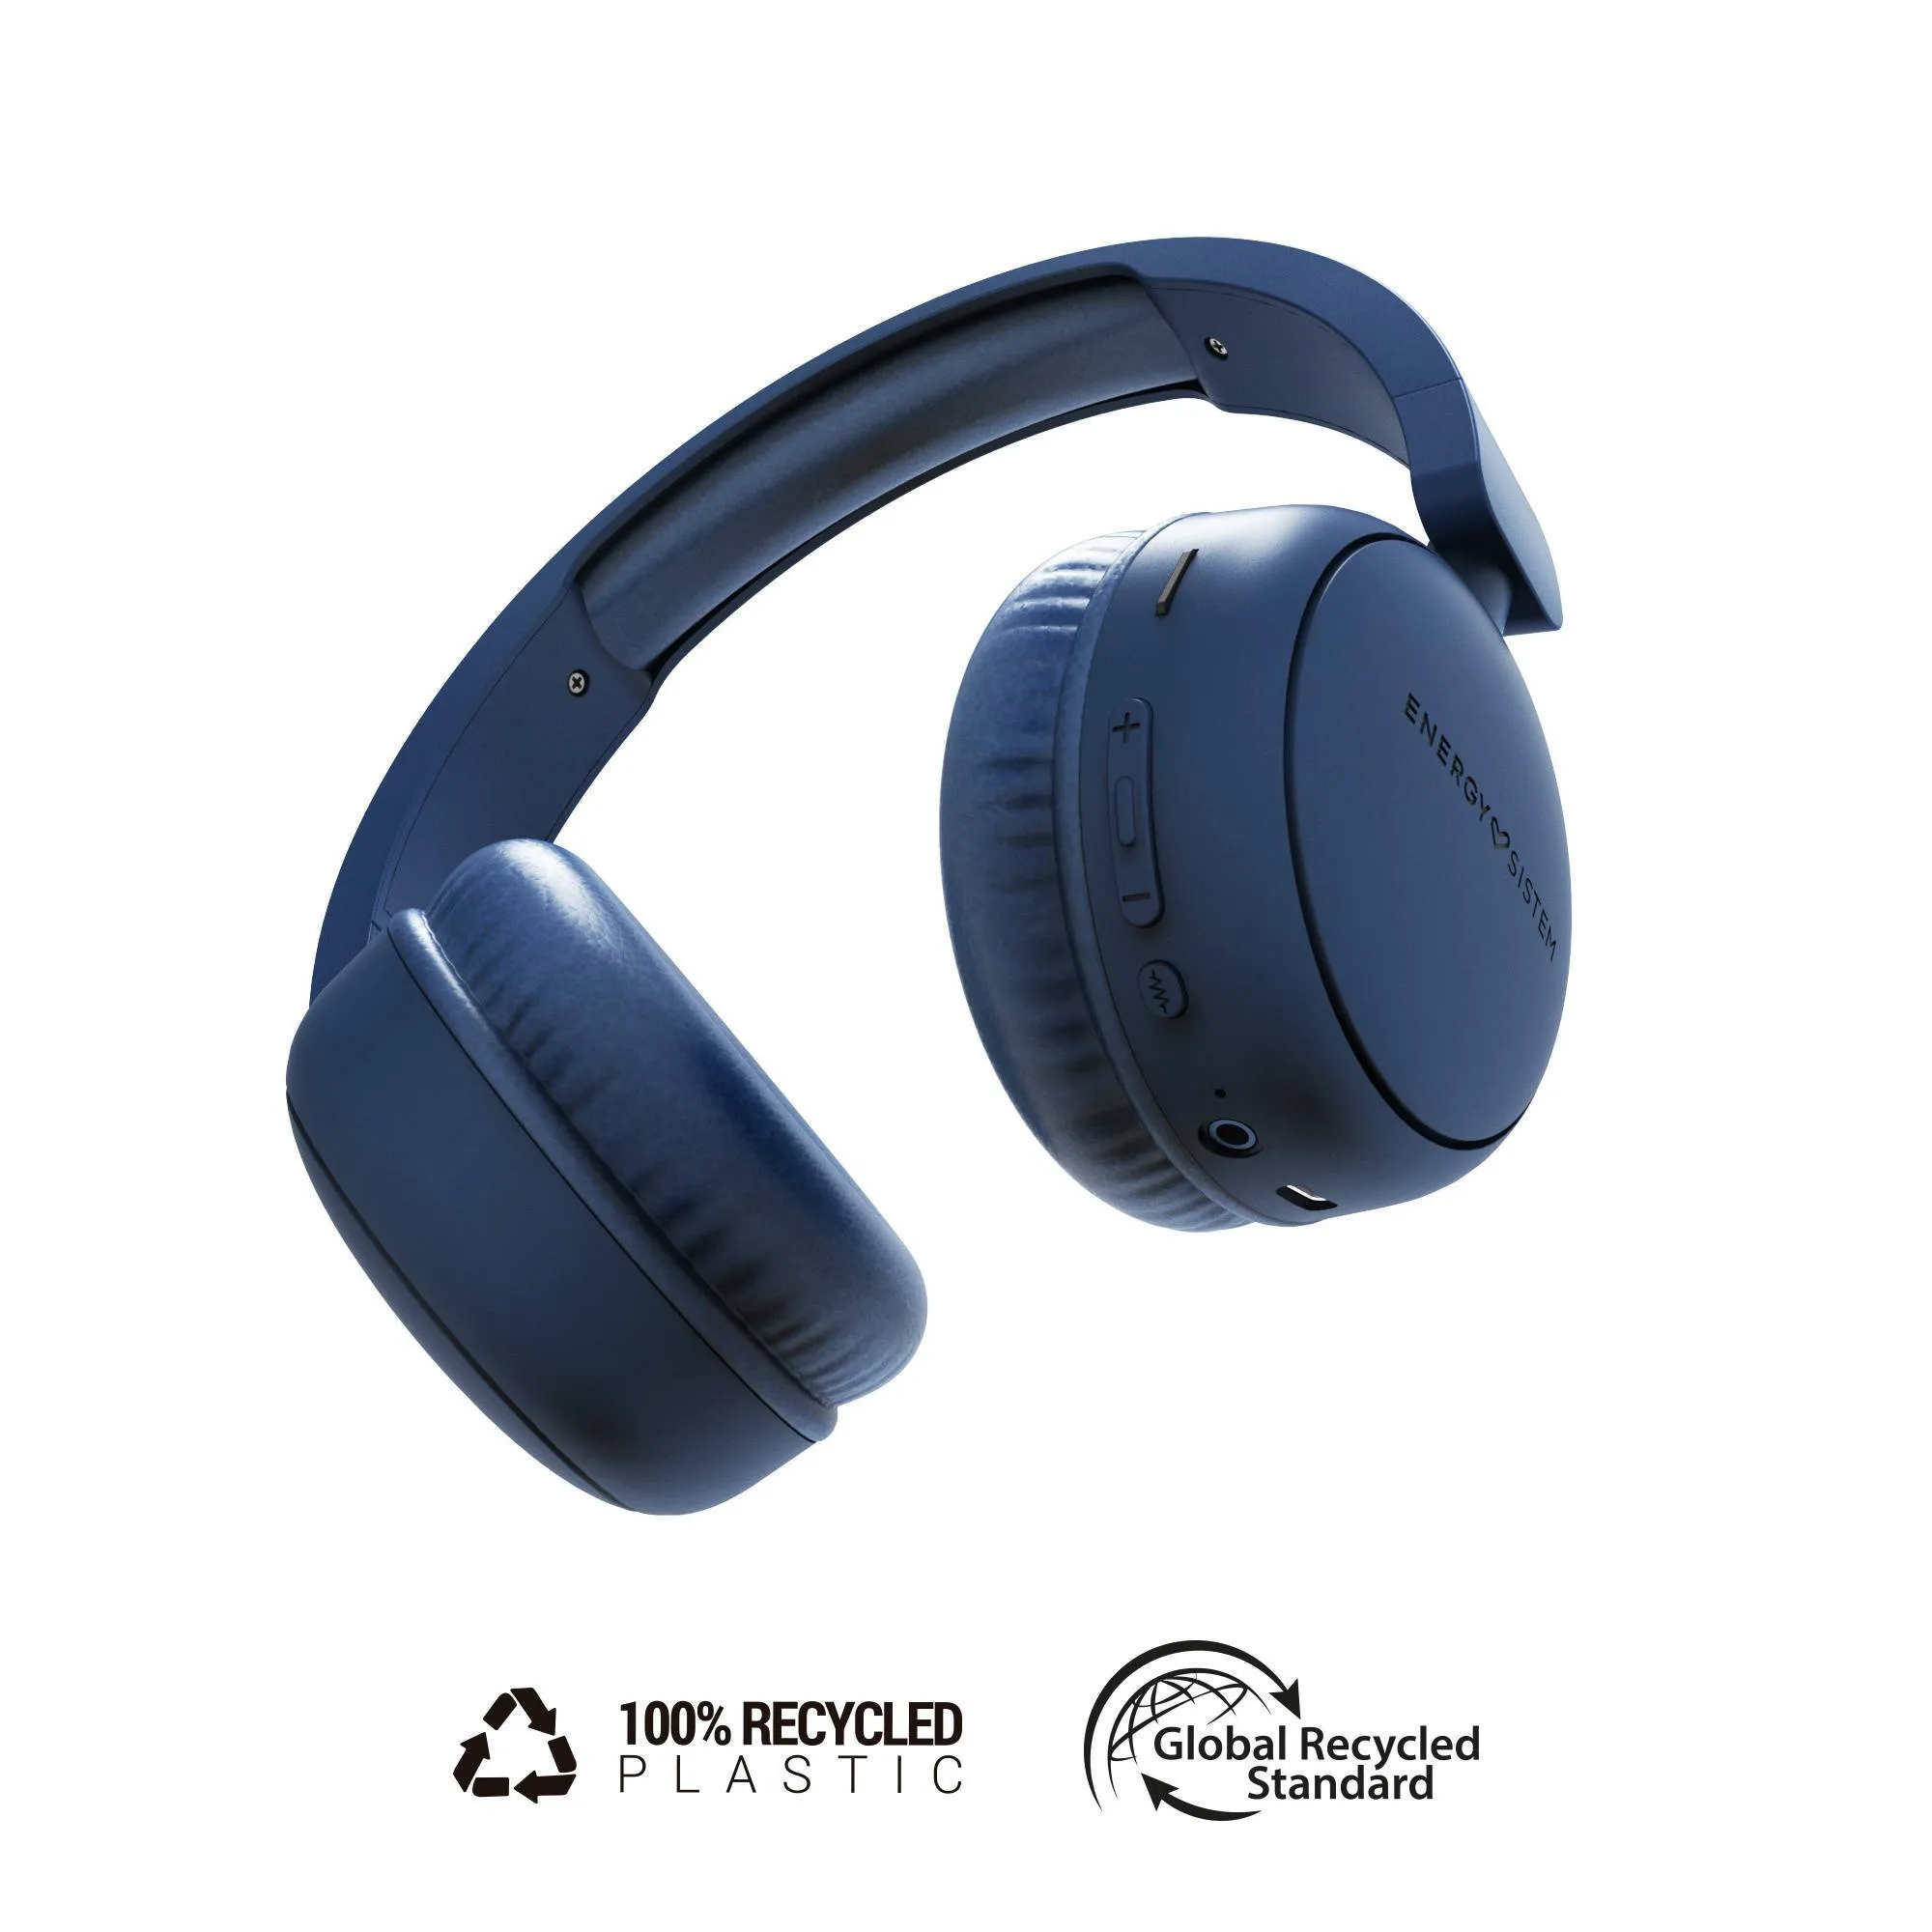 Radio Color indigo Buetooth headphones made from recycled plastic, with built-in FM radio and Micro SD slo